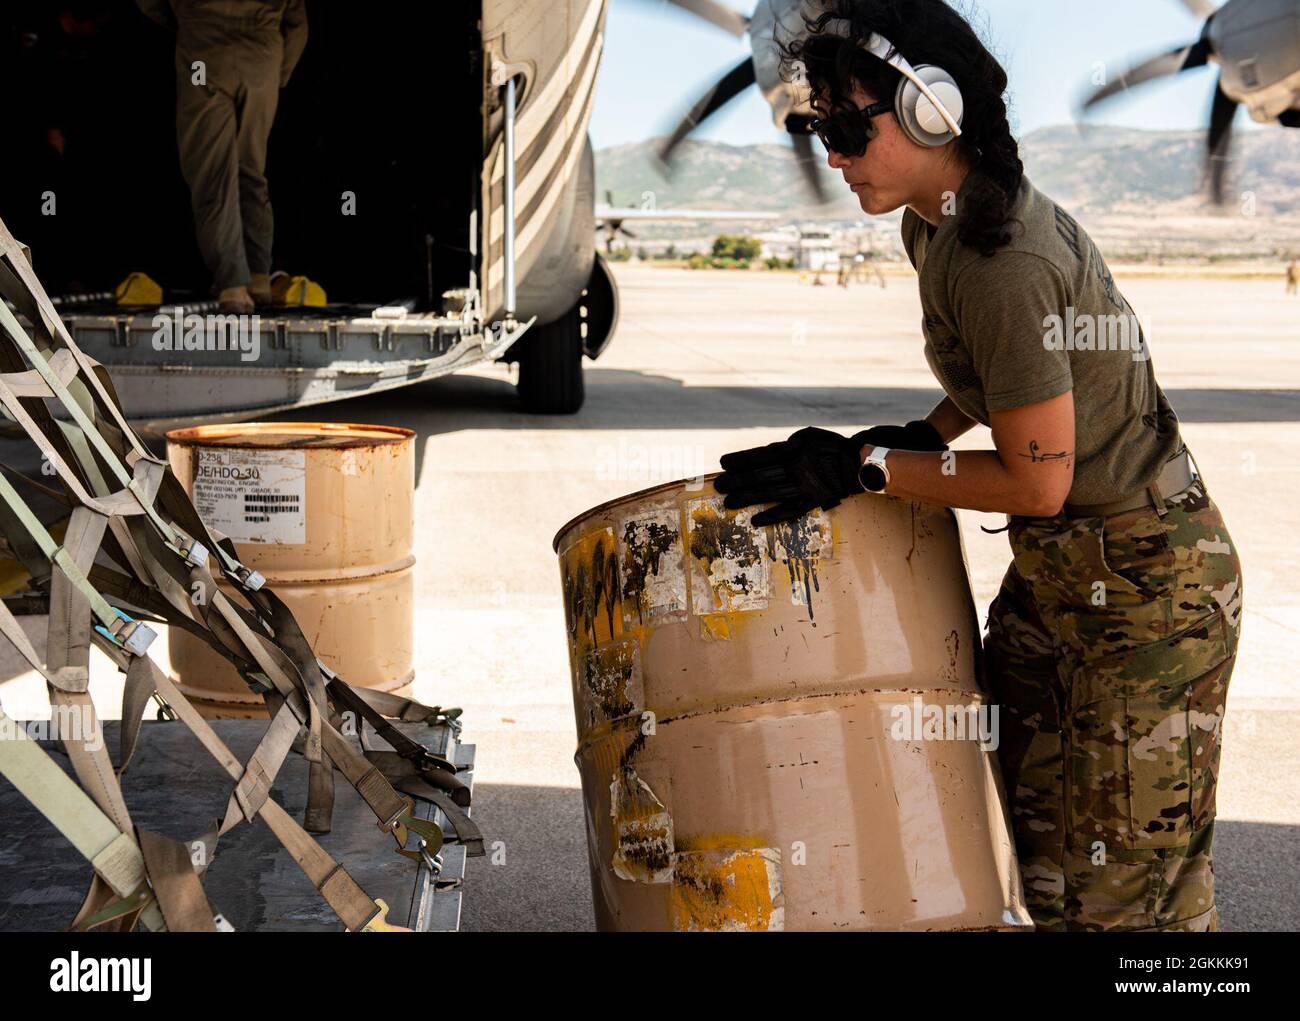 U.S. Air Force 1st Lt. Miolani Grenier, U.S. Air Forces in Europe – Air Forces Africa Intelligence, Surveillance, Reconnaissance capabilities and development deputy chief, positions a barrel underneath a cargo pallet as an alternative platform during a combat offload training scenario as part of Operation Stolen Cerberus VIII at Elefsis Air Base, Greece, May 18, 2021. Grenier supports the bilateral training event as a multi-capable Airmen (MCA) from the Cross-Functional Airlift Support Personnel (CASPER) program based at Ramstein Air Base, Germany. The CASPER program brings together teams of A Stock Photo